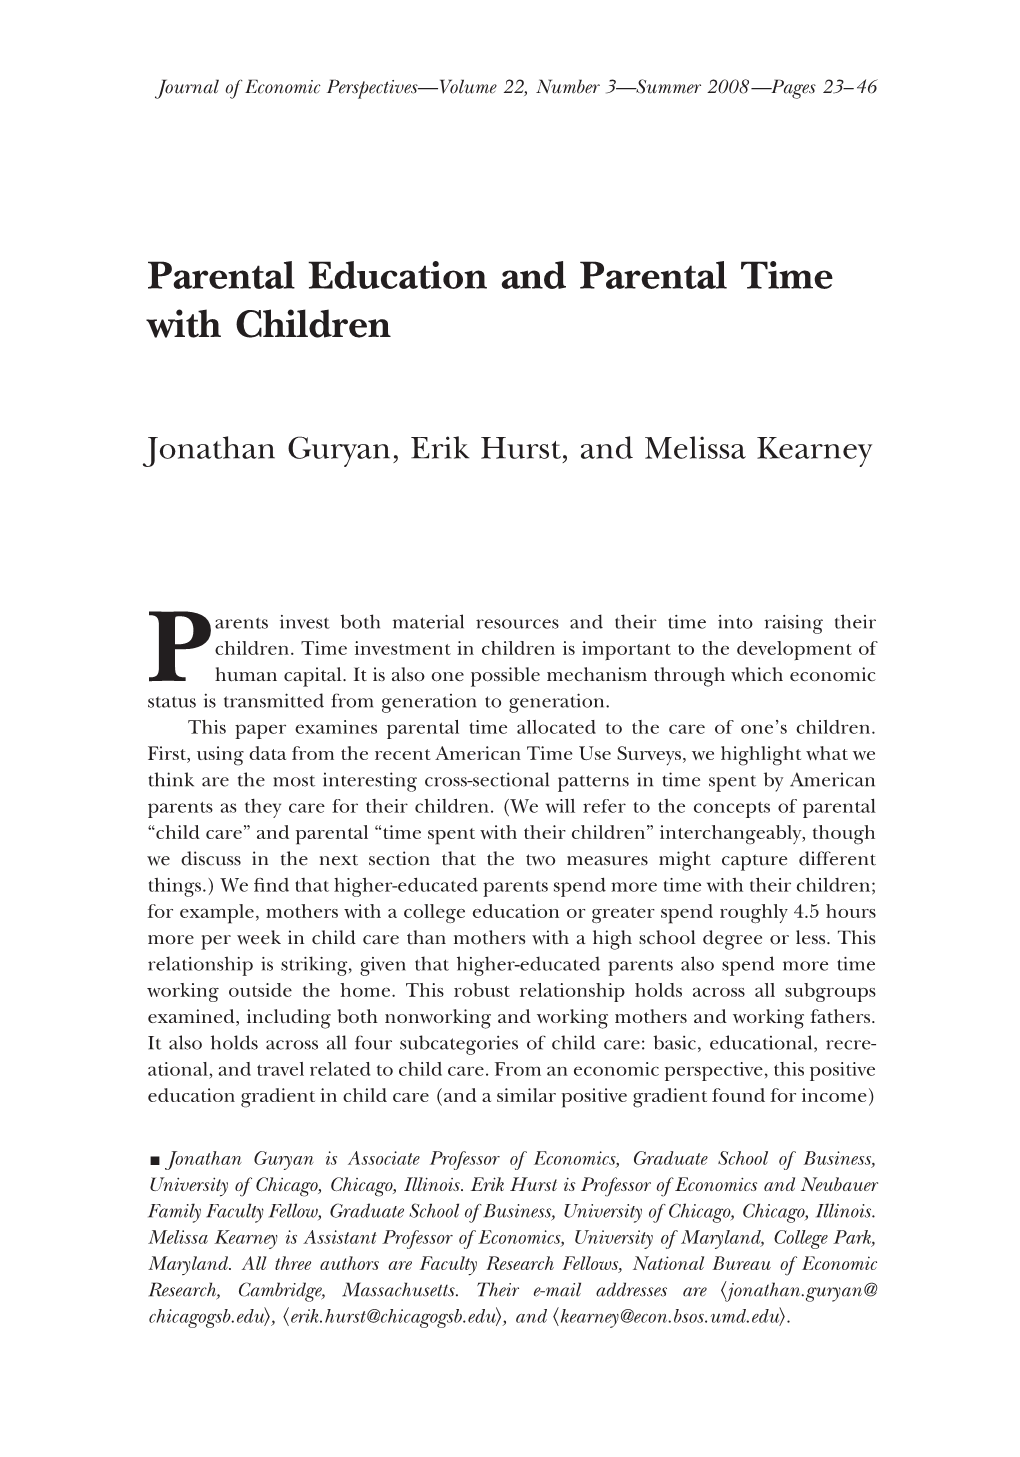 Parental Education and Parental Time with Children